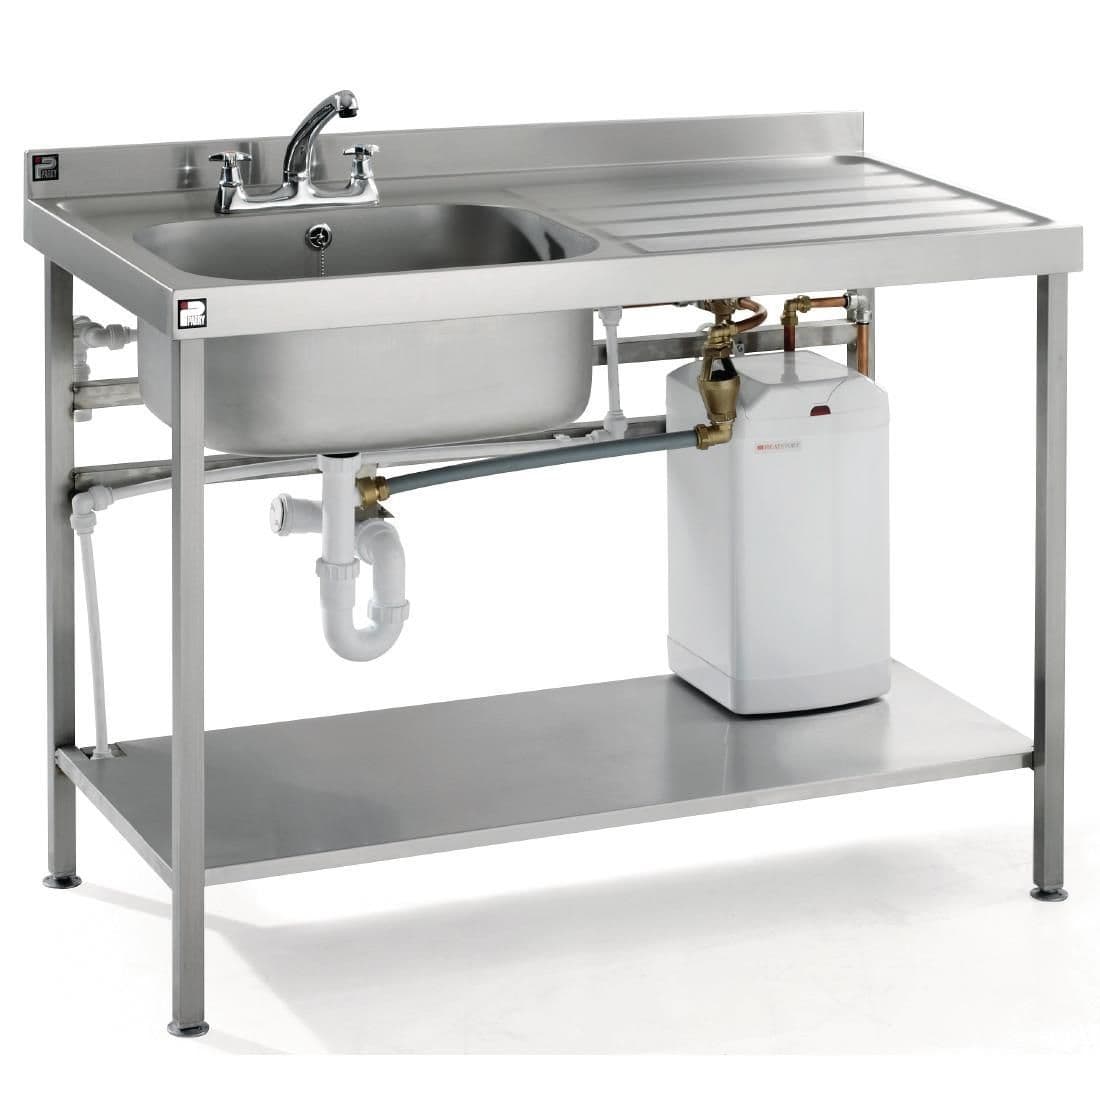 Parry Stainless Steel Fully Assembled Sink Right Hand Drainer 1400mm With Boiler